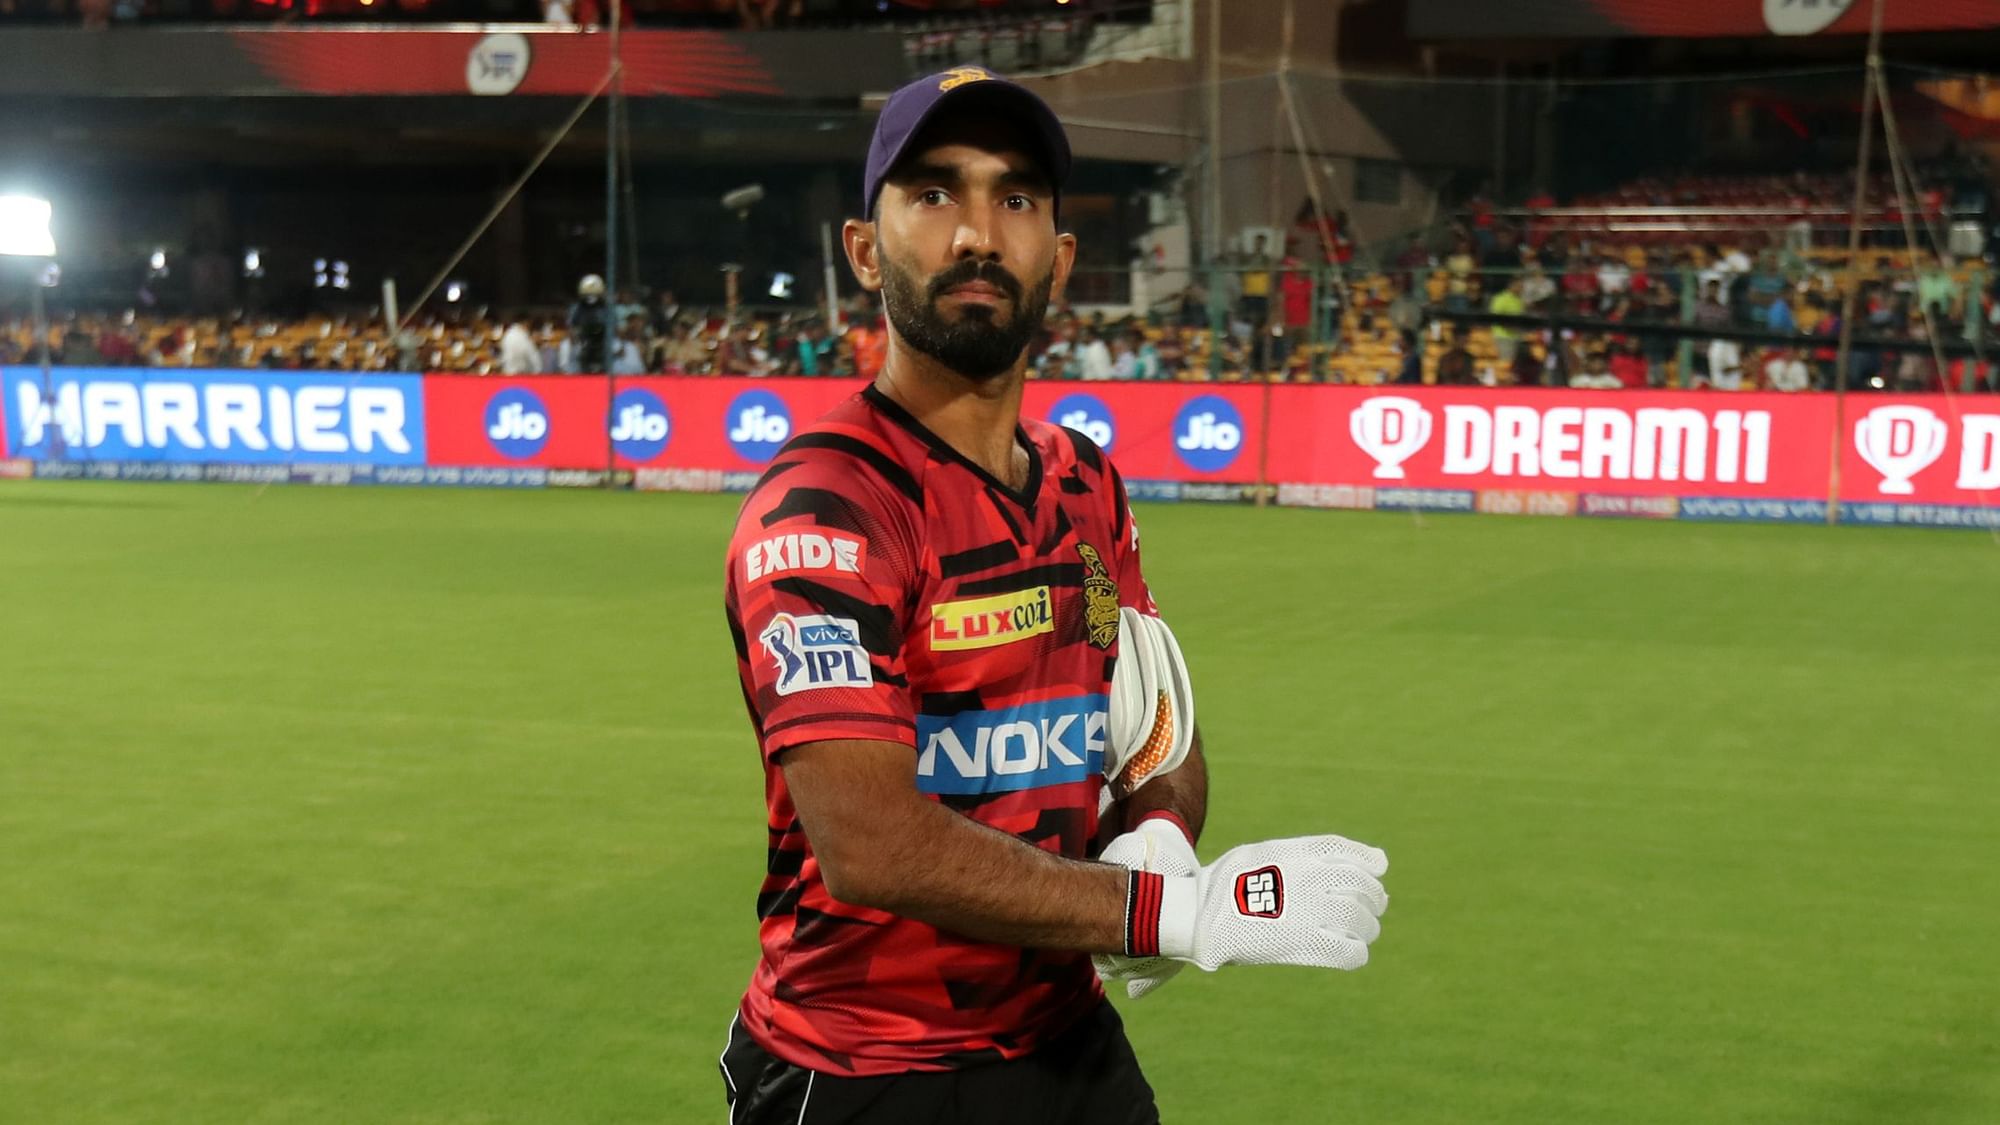 Wicketkeeper-batsman Dinesh Karthik said he remained confident about his selection in India’s World Cup squad despite being dropped for the ODIs against Australia.